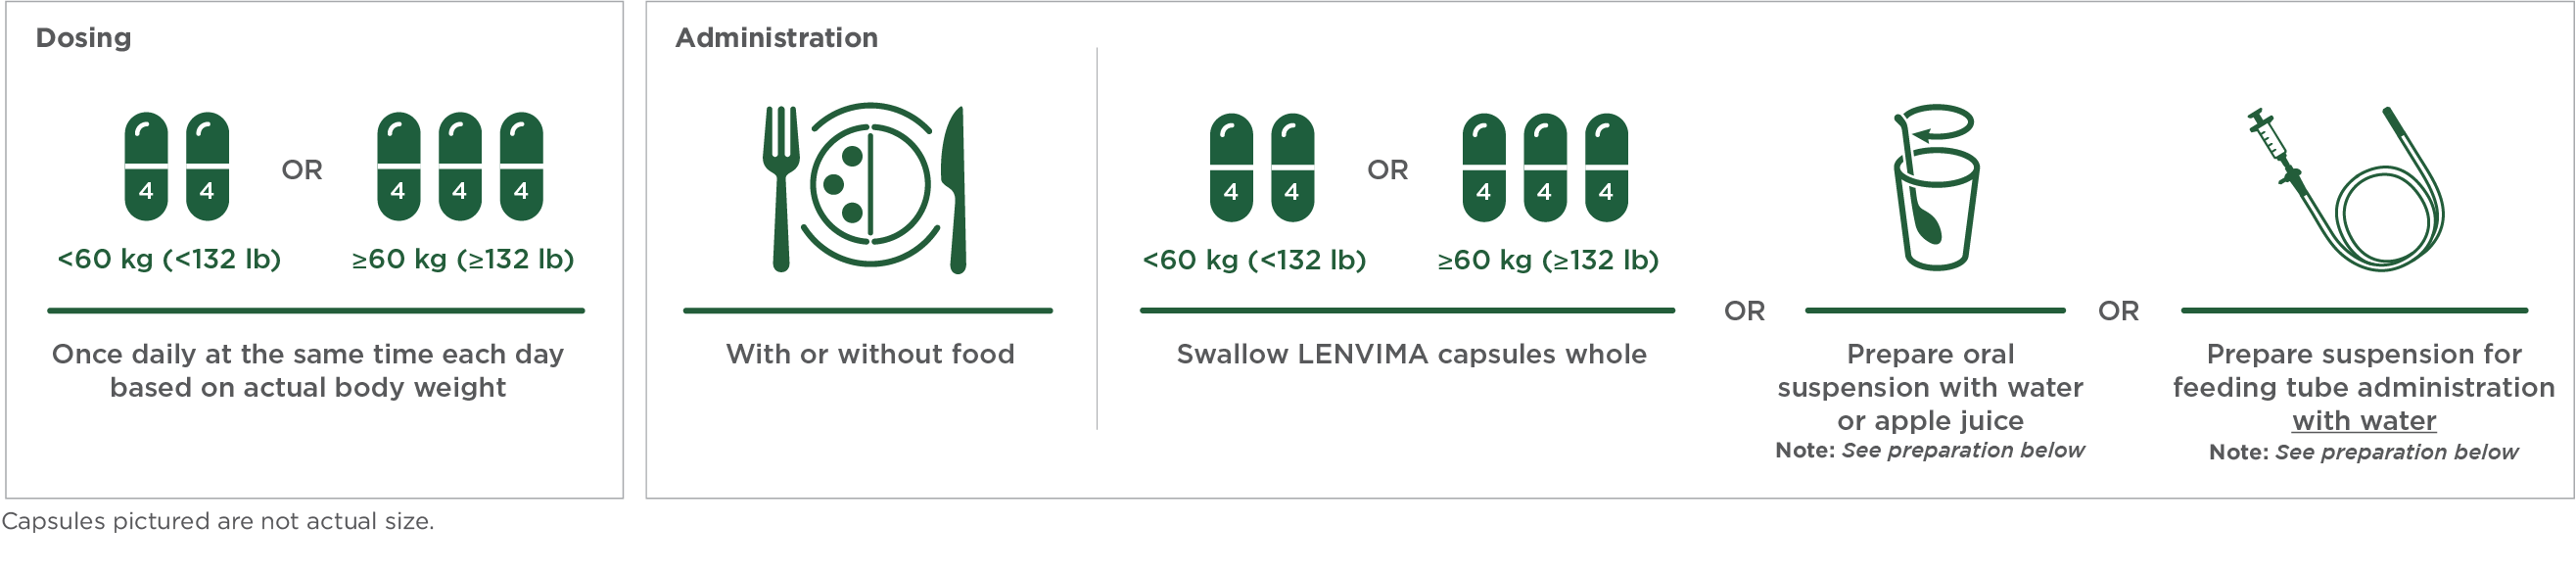 LENVIMA dosing is once a day, every day, with or without food, and is based on body weight graphic